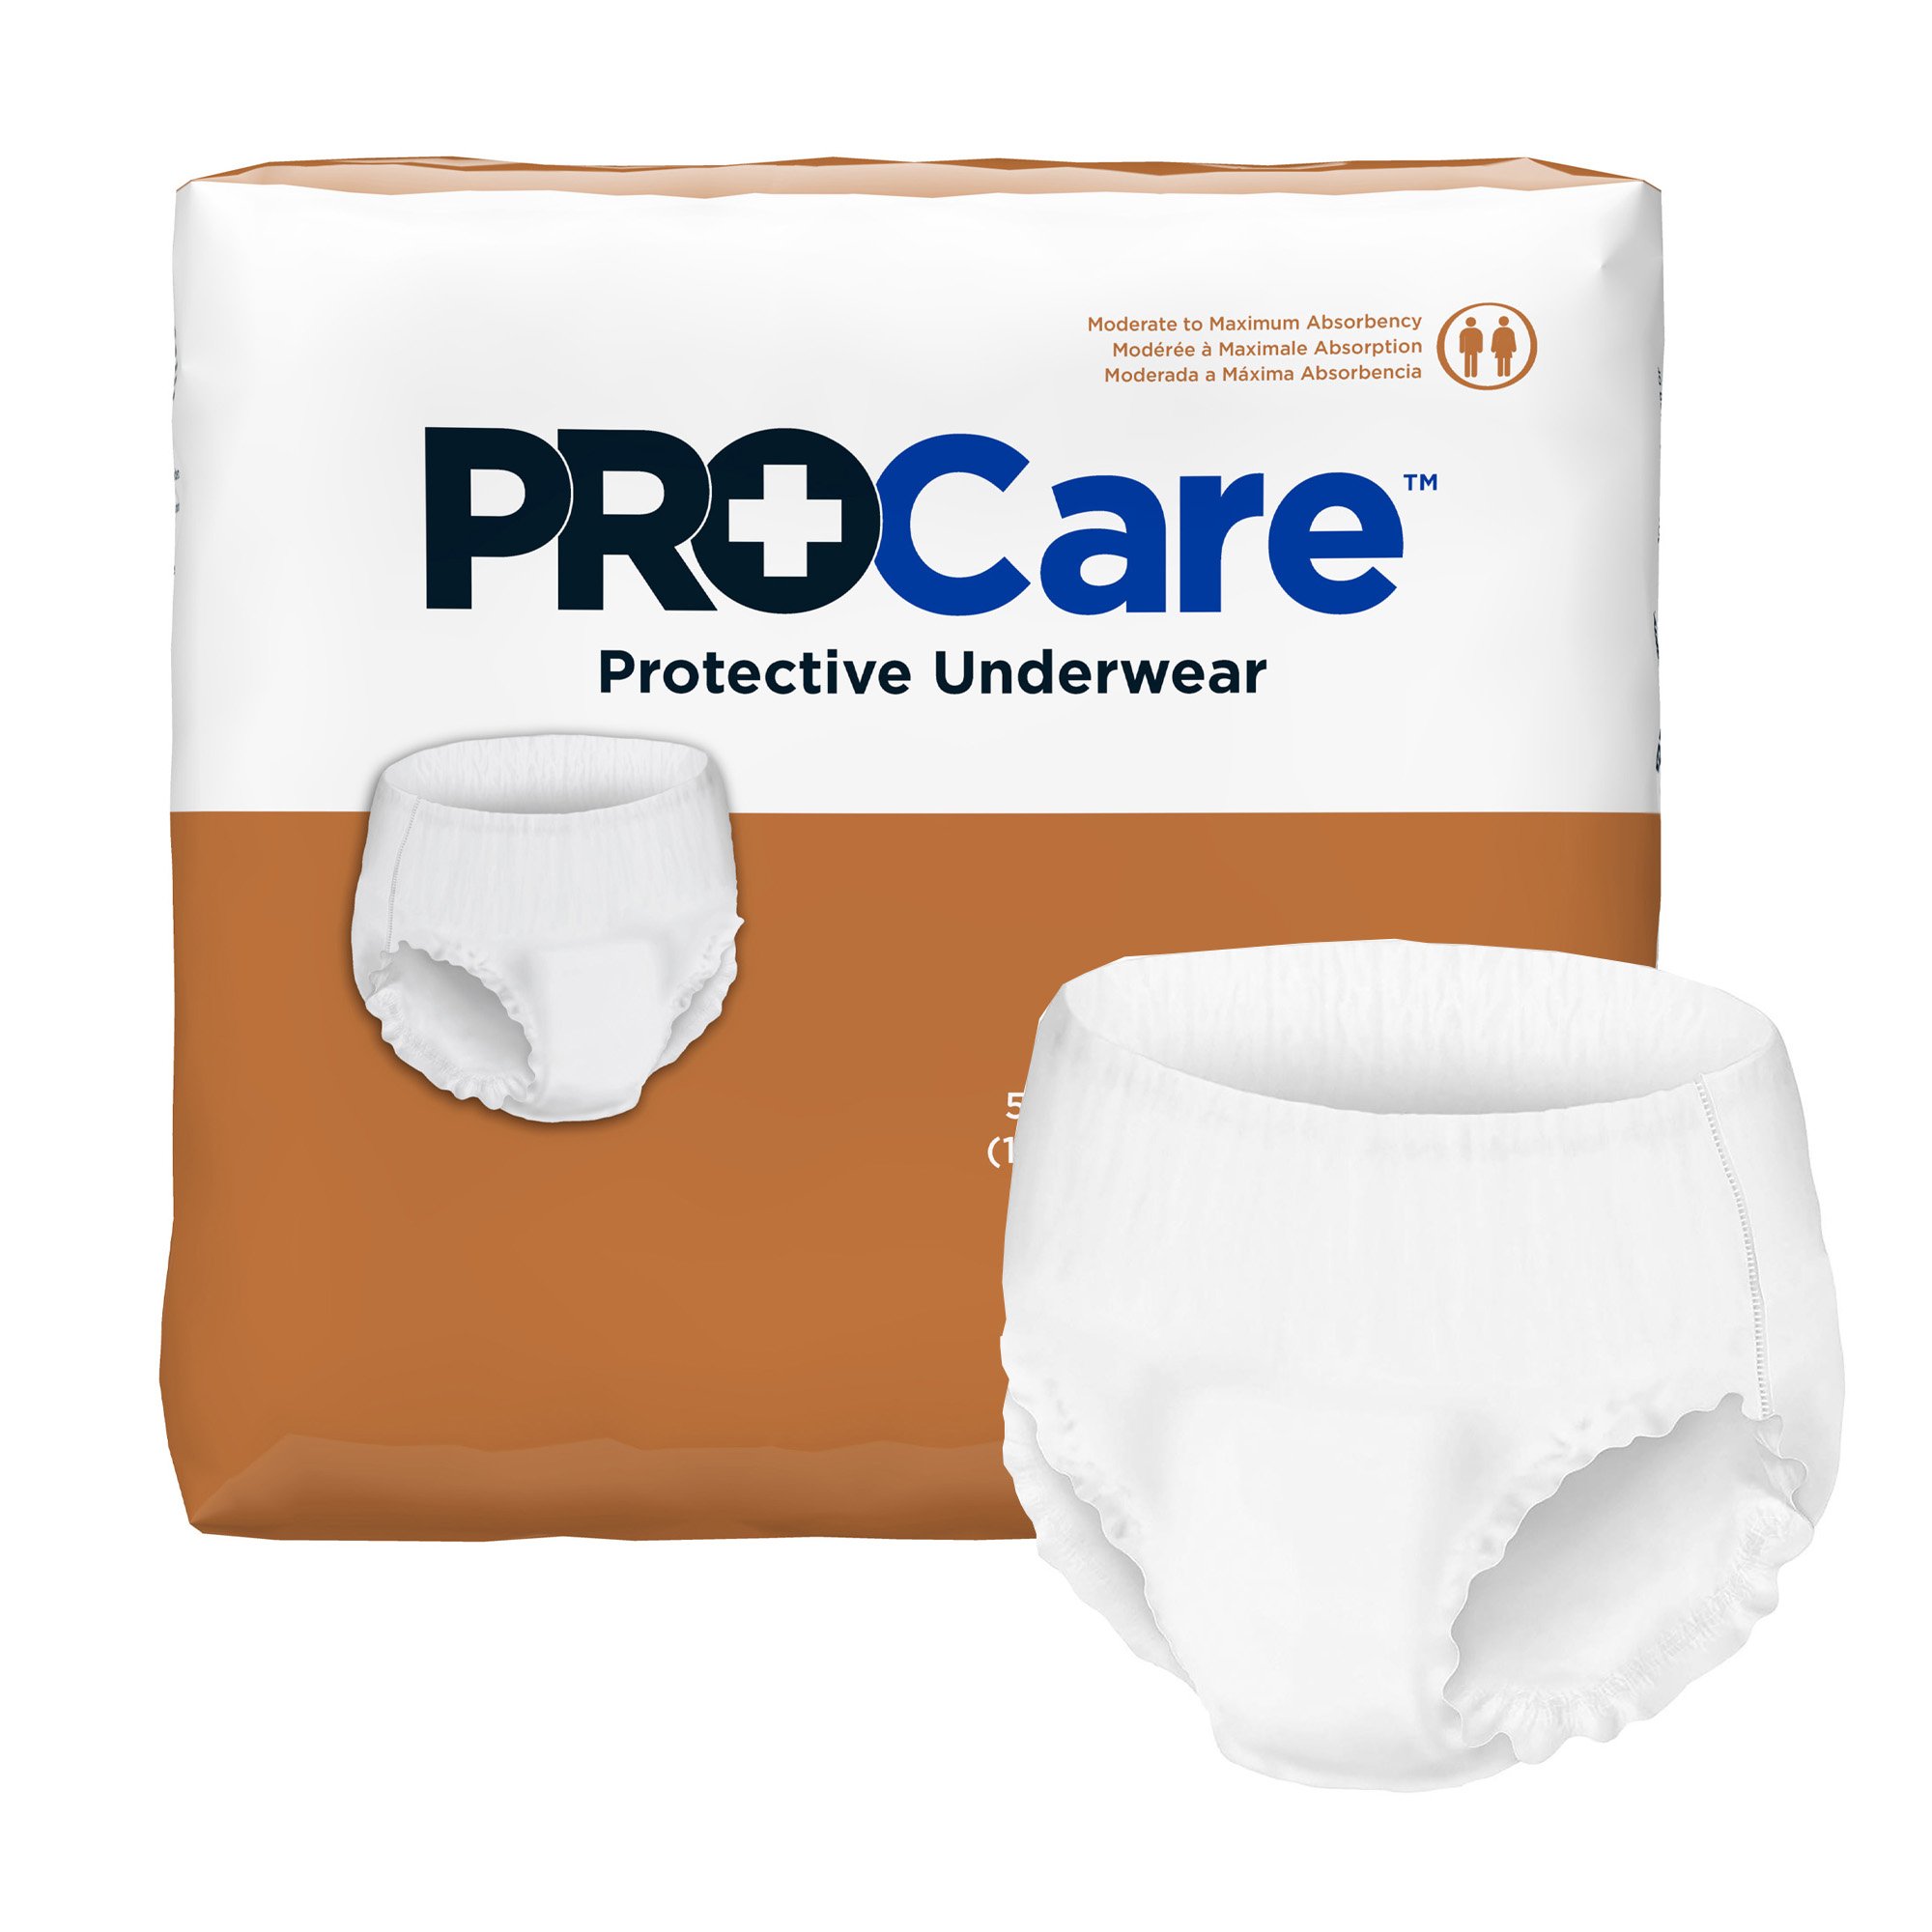 Procare Protective Underwear - Manhattan, NY - health and beauty - by owner  - household sale - craigslist